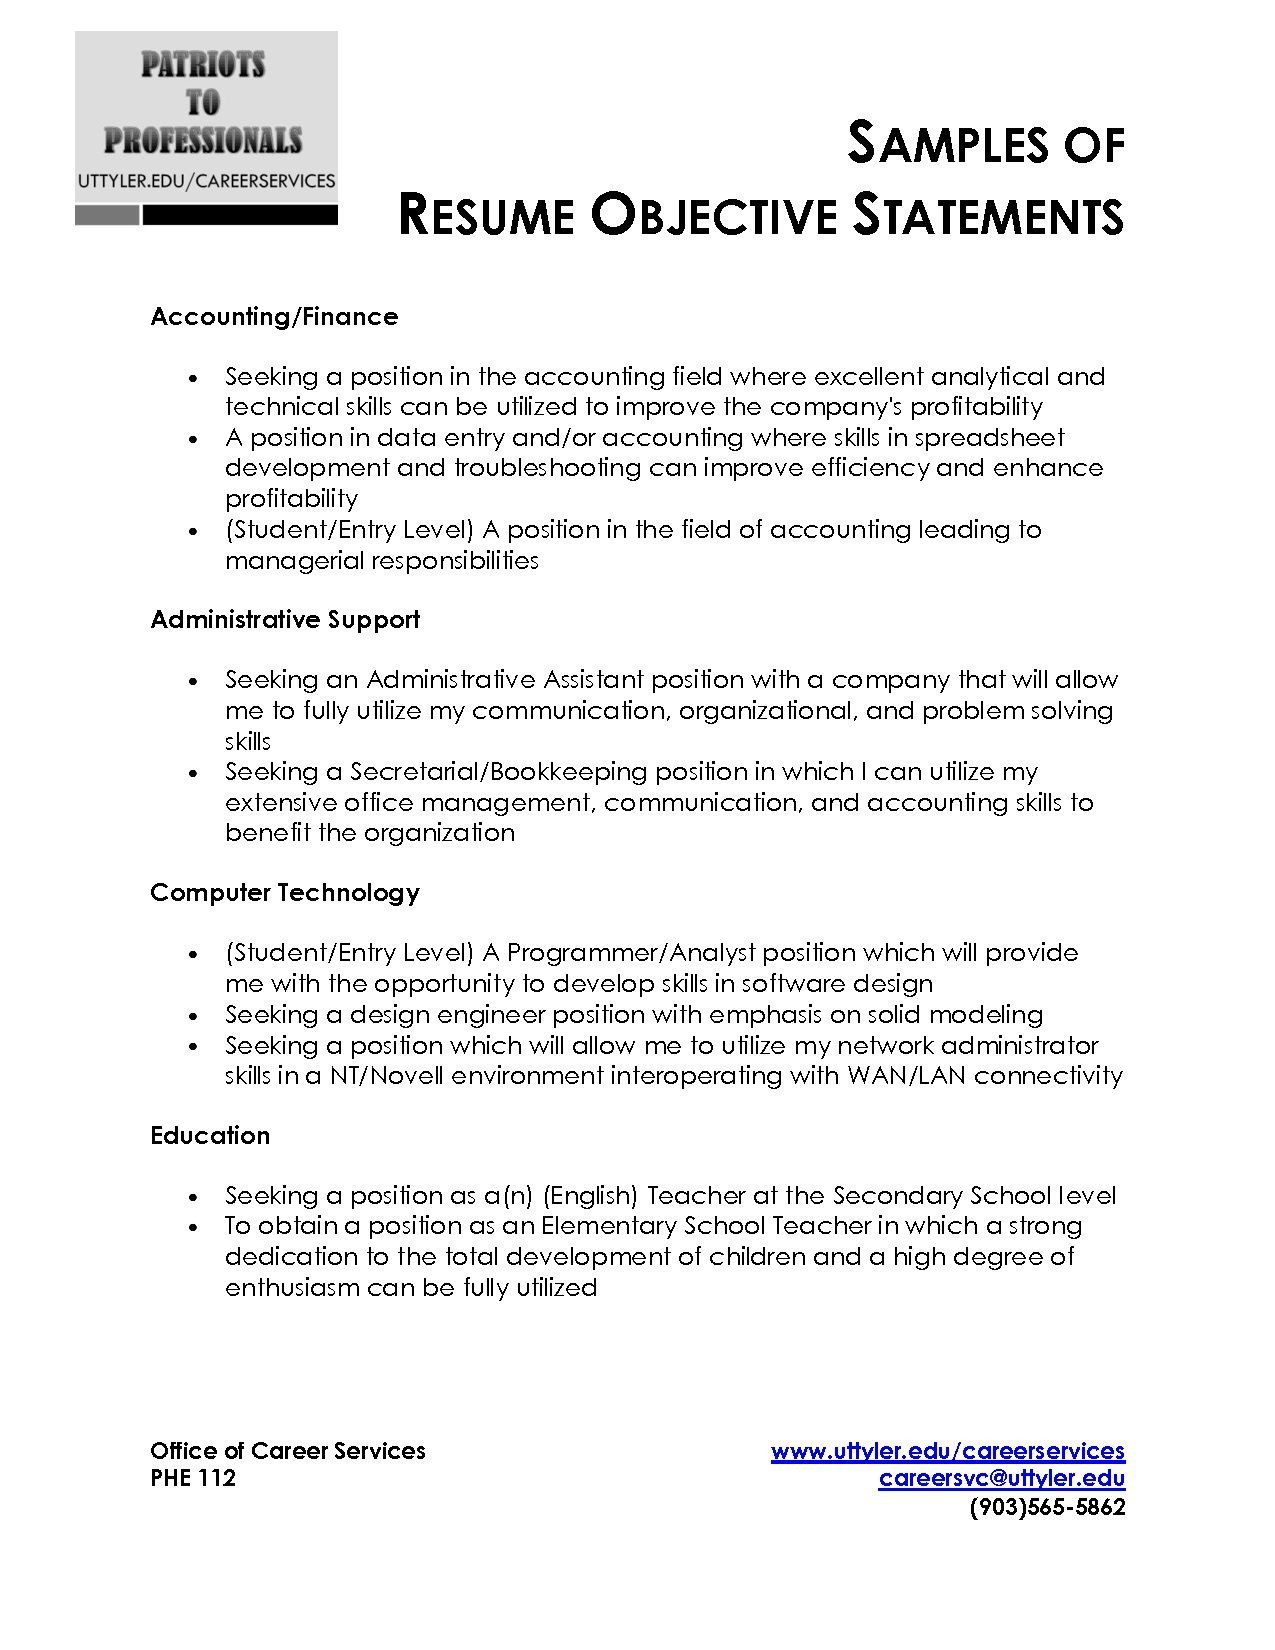 Sample Resume Objective Statements for Student Sample Resume Objective Statement Free Resume Templates